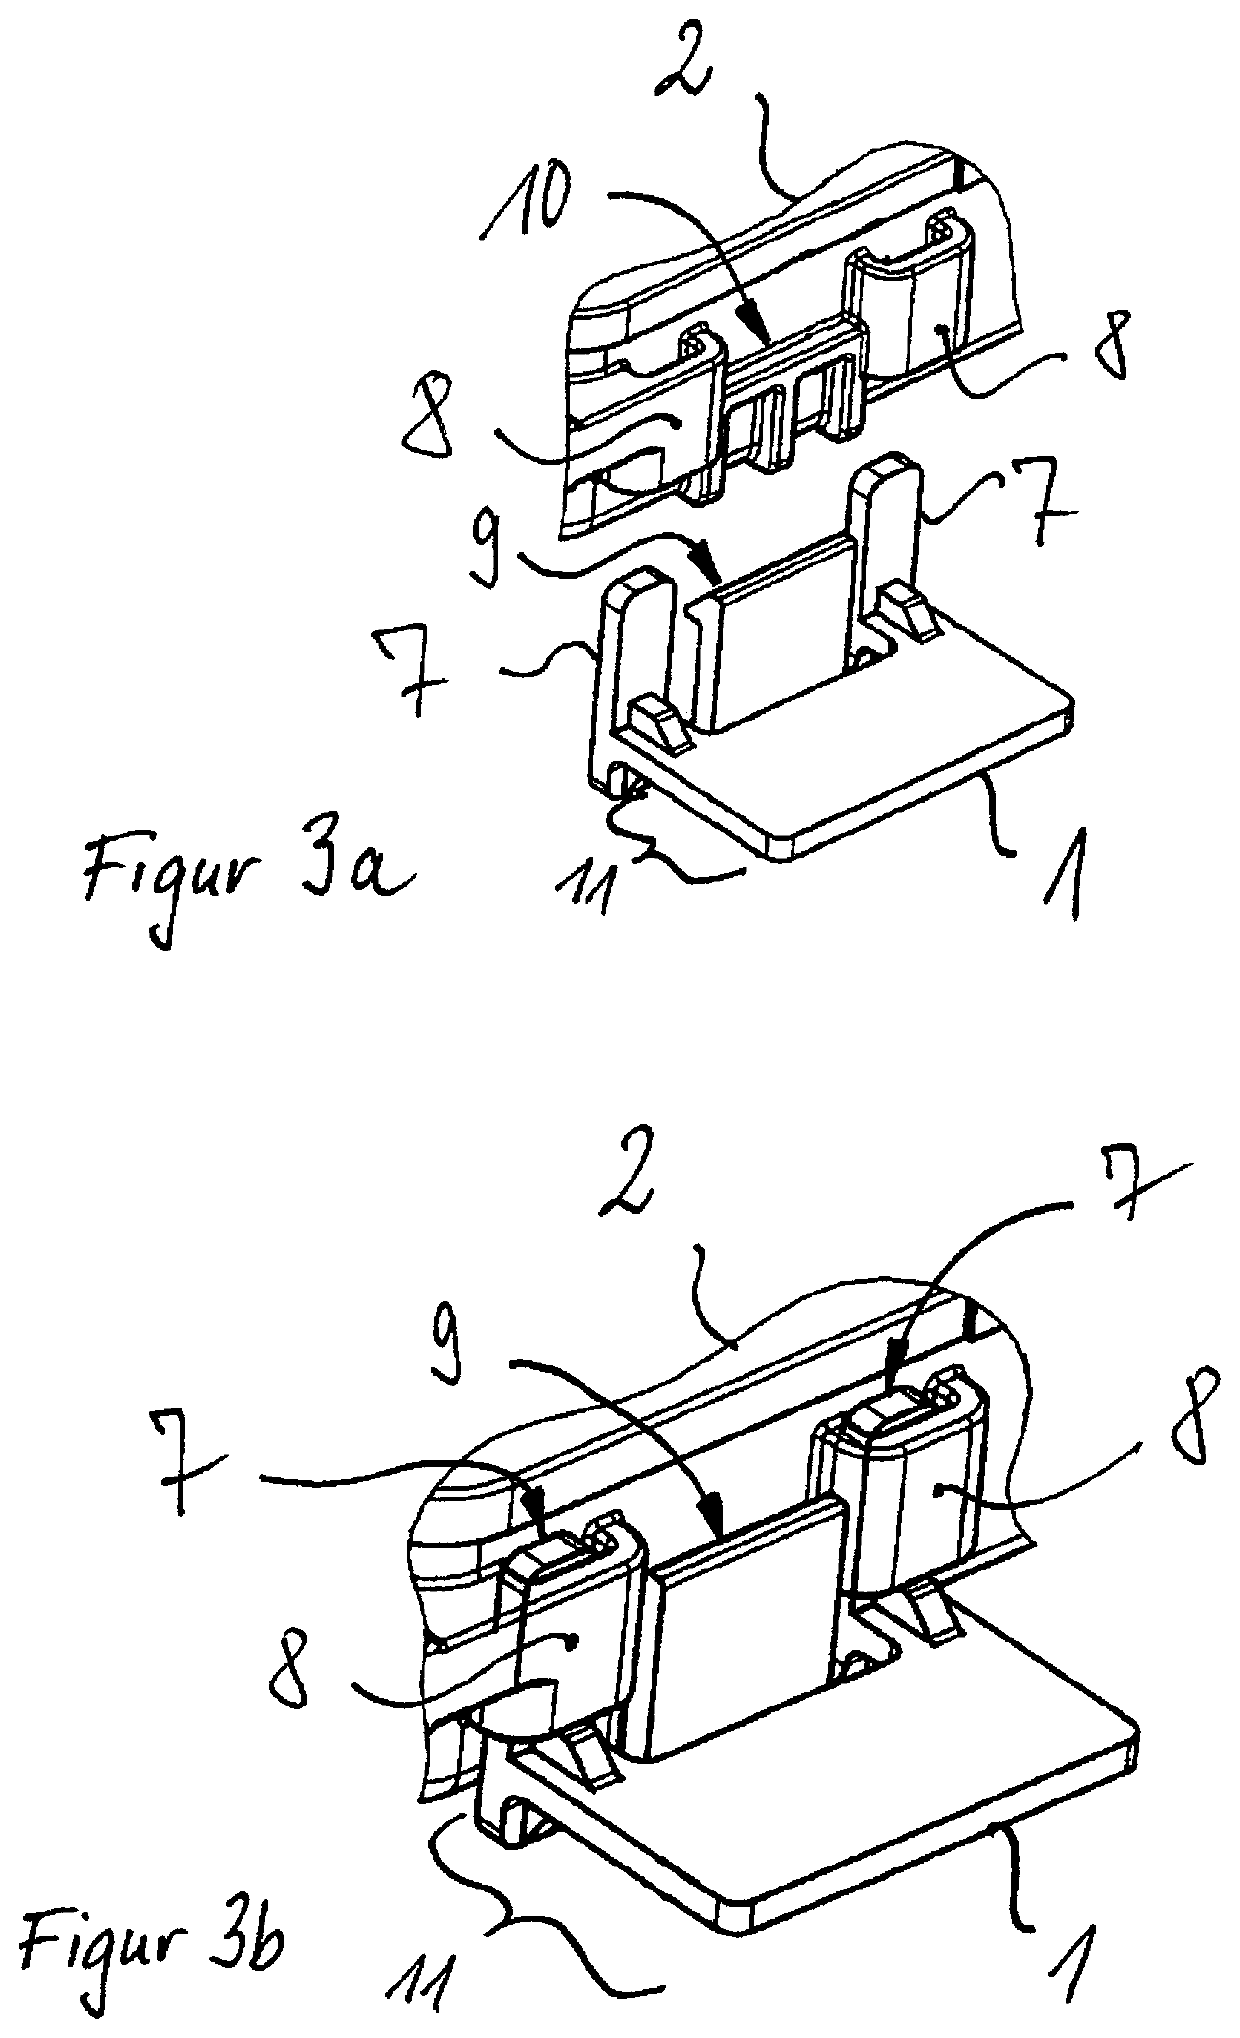 Device for ensuring the installation of a component at the designated installation location of said component